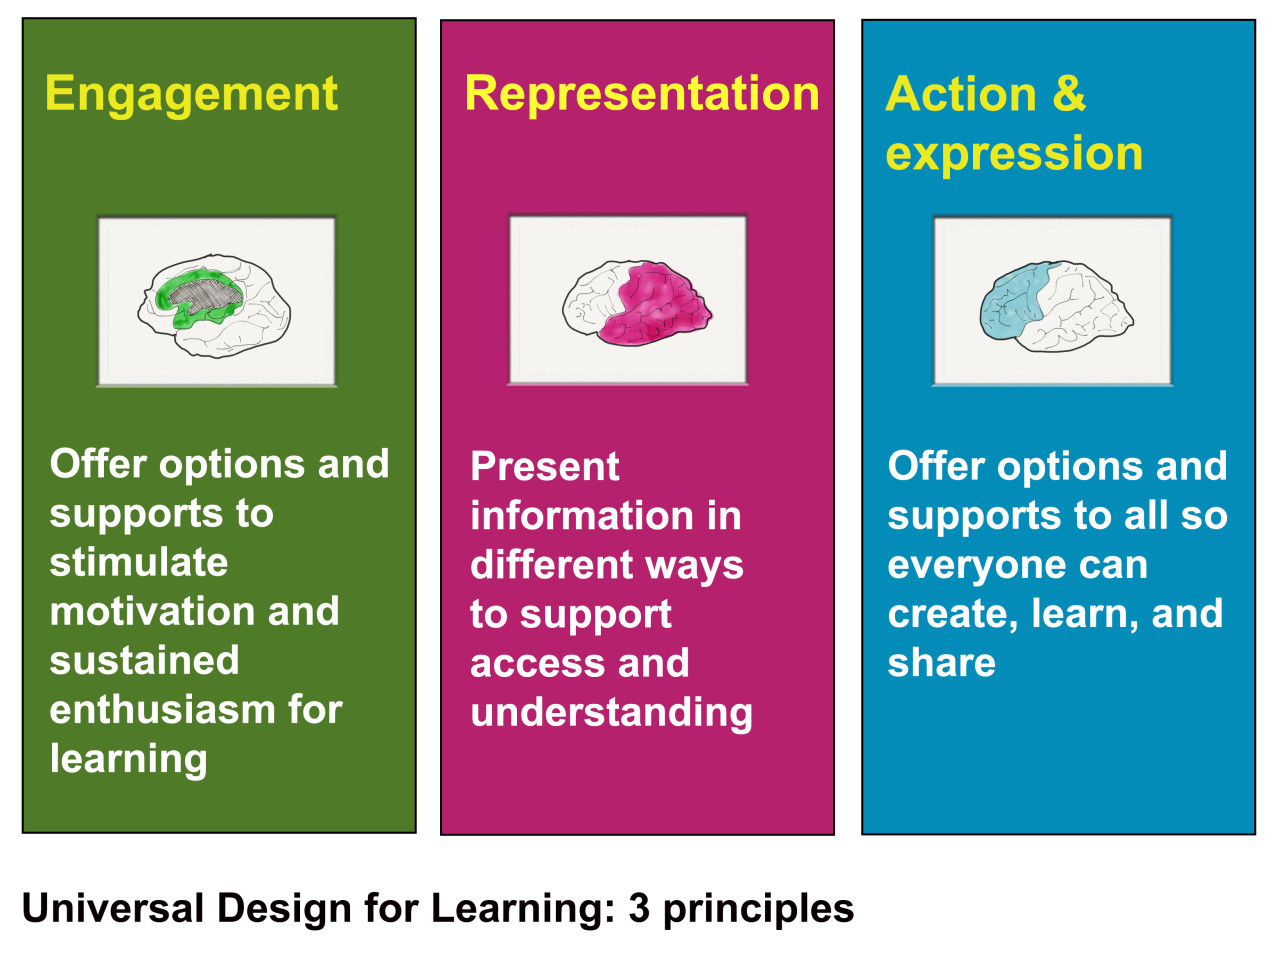 3-principles-of-UDL-based-on-the-work-of-CAST-Center-of-Applied-Special-Technologies